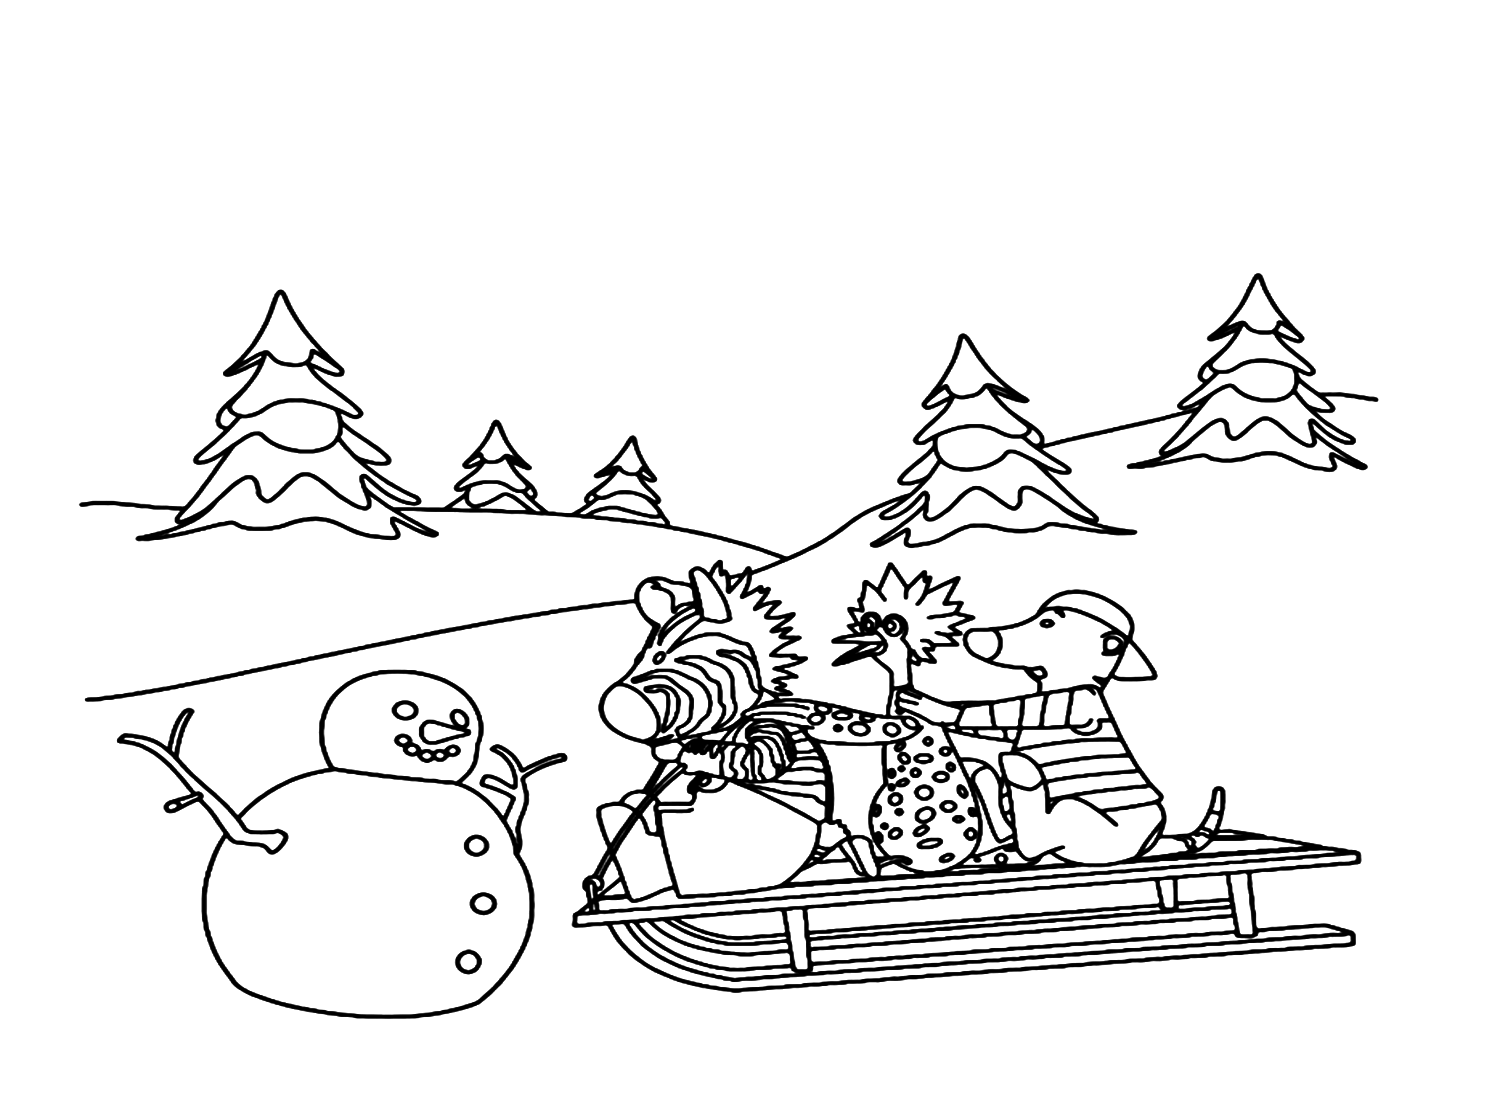 The Zigby The Zebra Coloring Pages